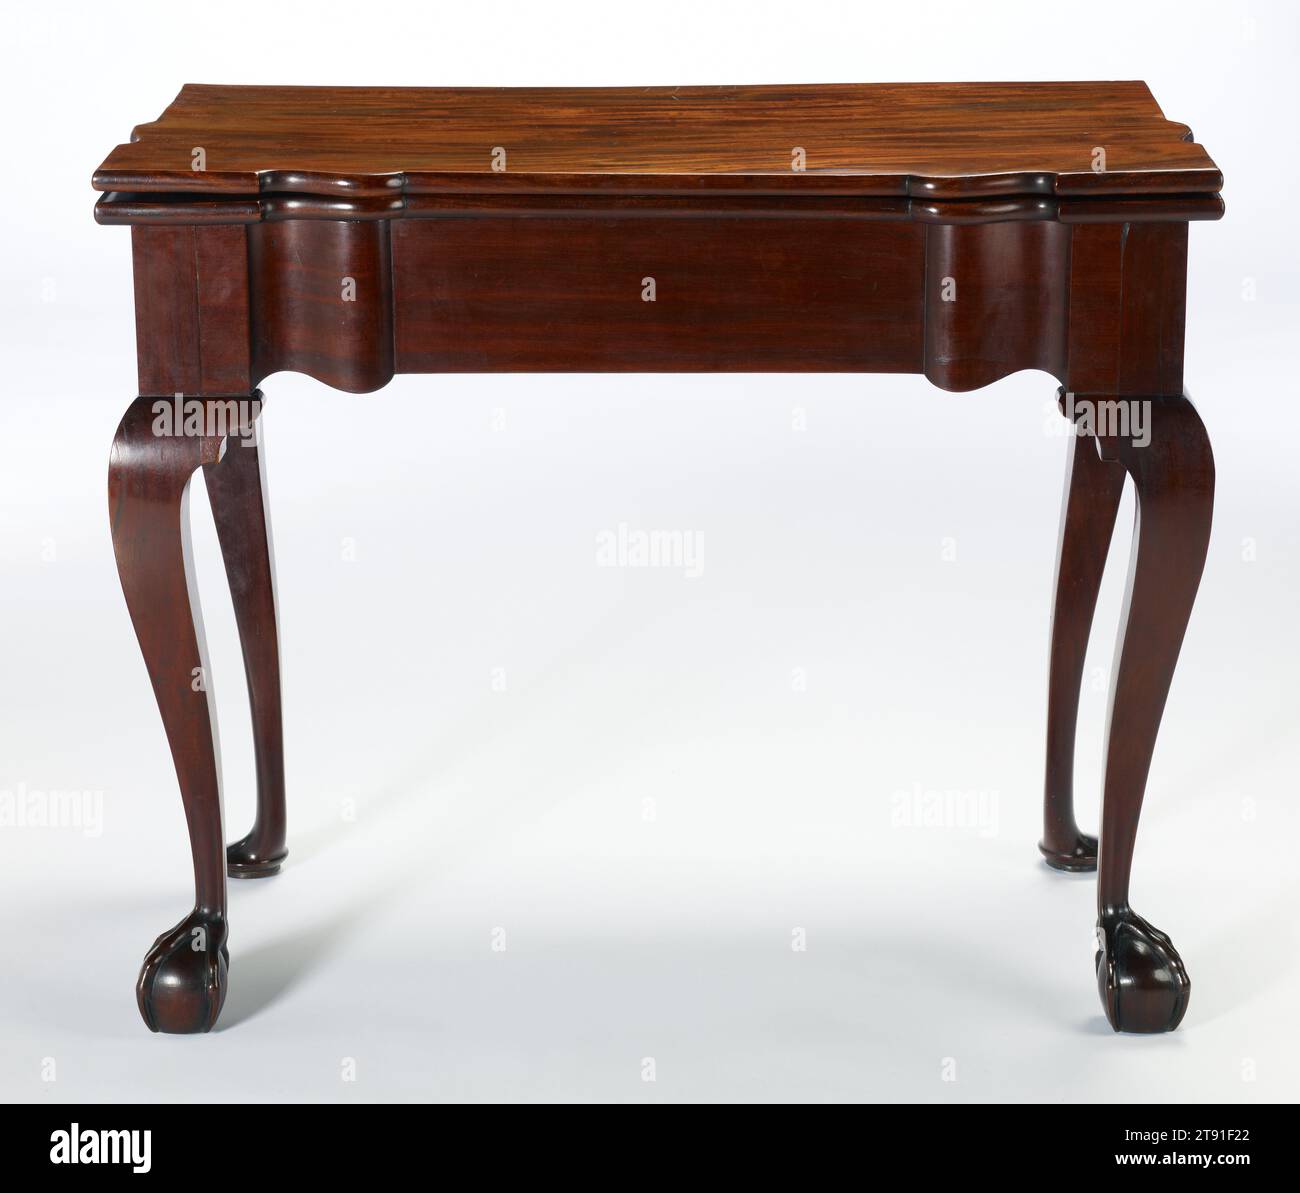 Card table, c. 1770, attributed to John Goddard, American, (Newport, Rhode Island), active 1724 - 1786, 28 1/2 x 34 x 34 in. (72.39 x 86.36 x 86.36 cm), Mahogany with maple, United States, 18th century Stock Photo